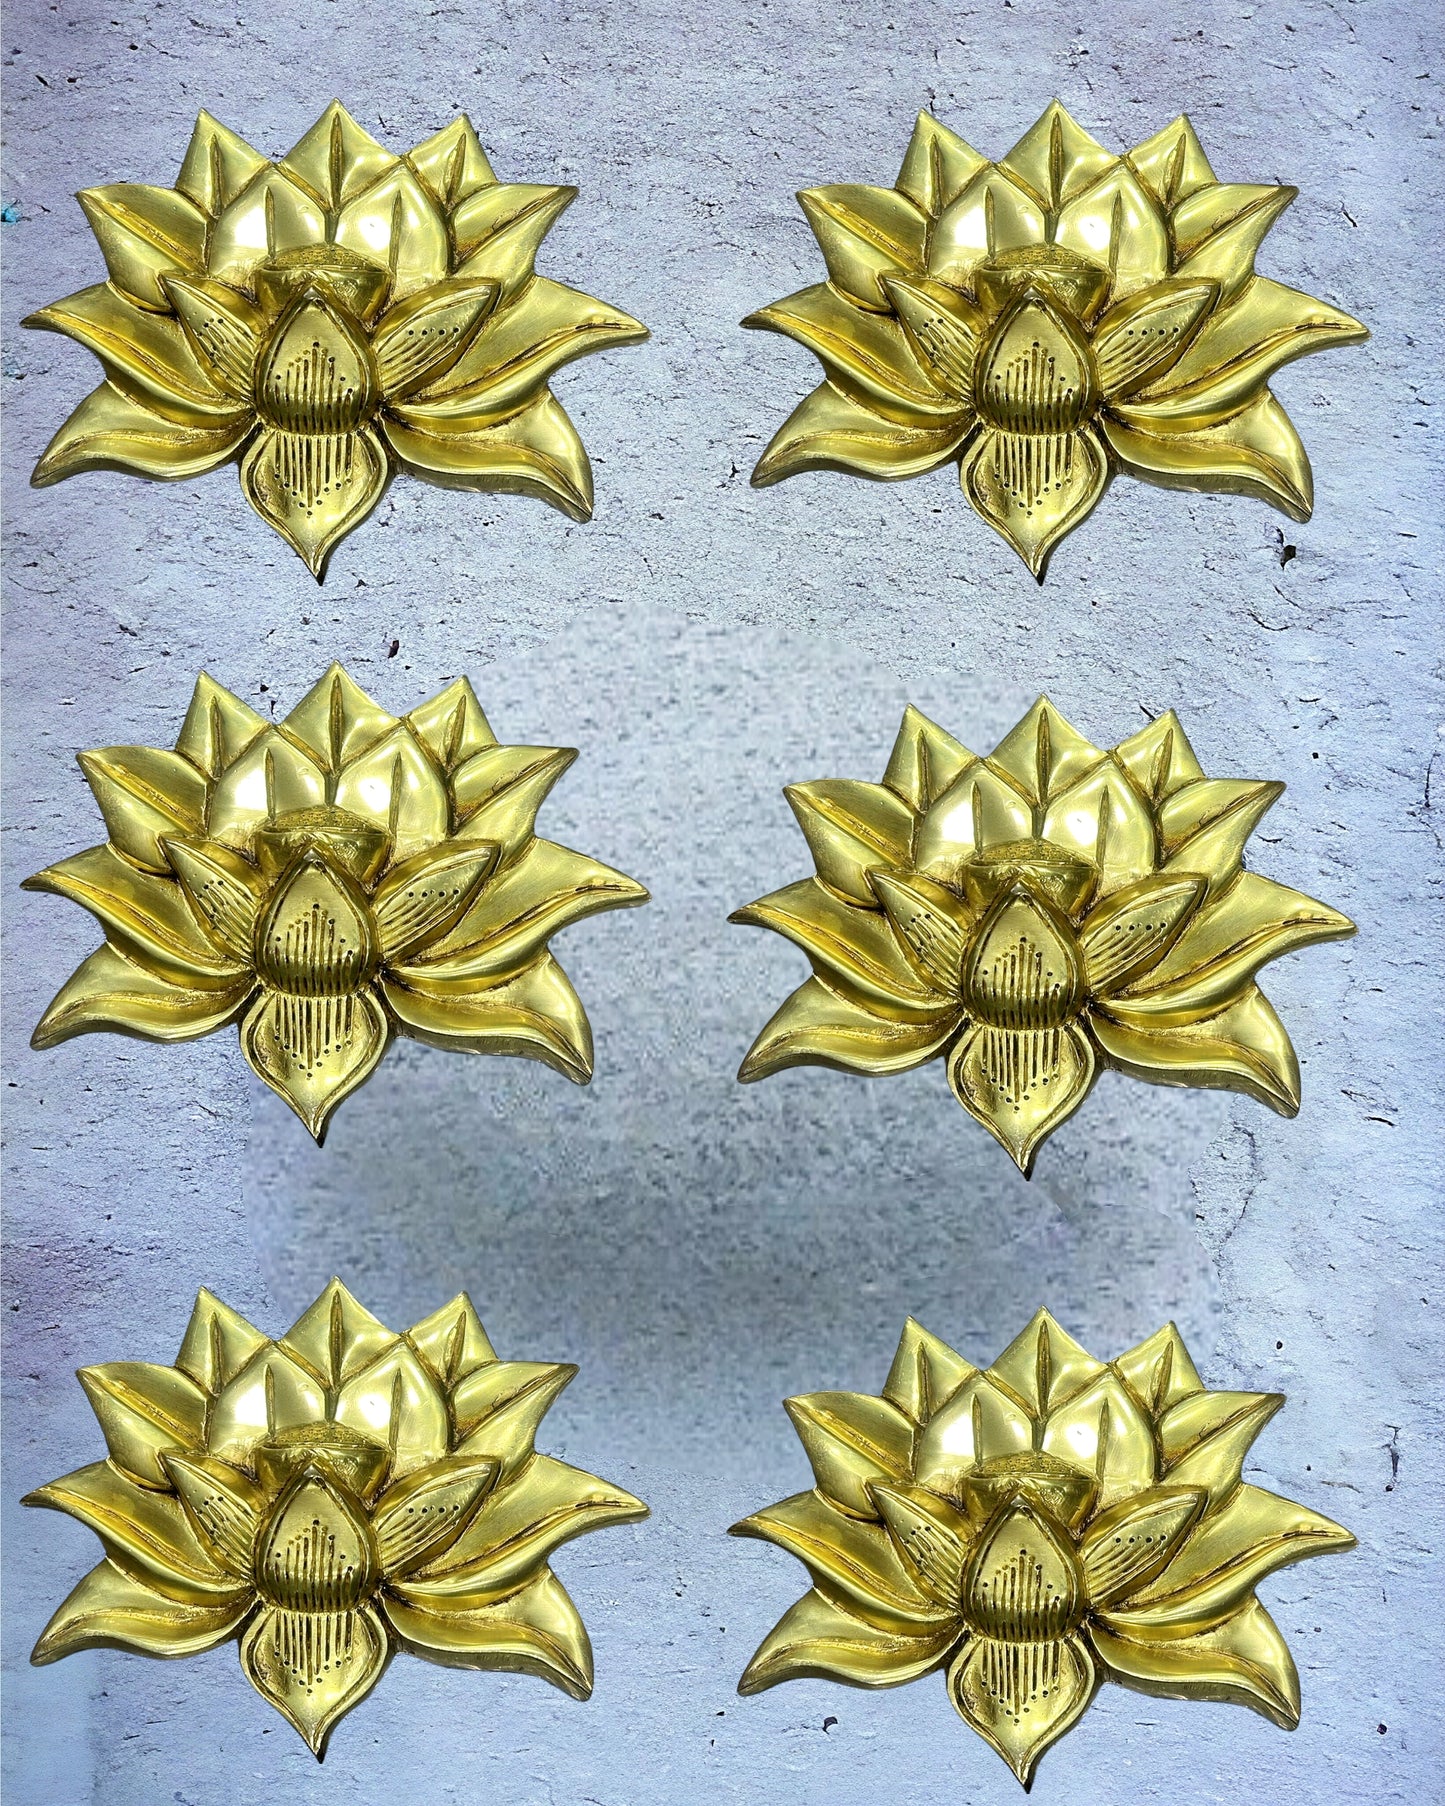 Handcrafted Pure Brass Lotus Wall Hanging - 5.25"